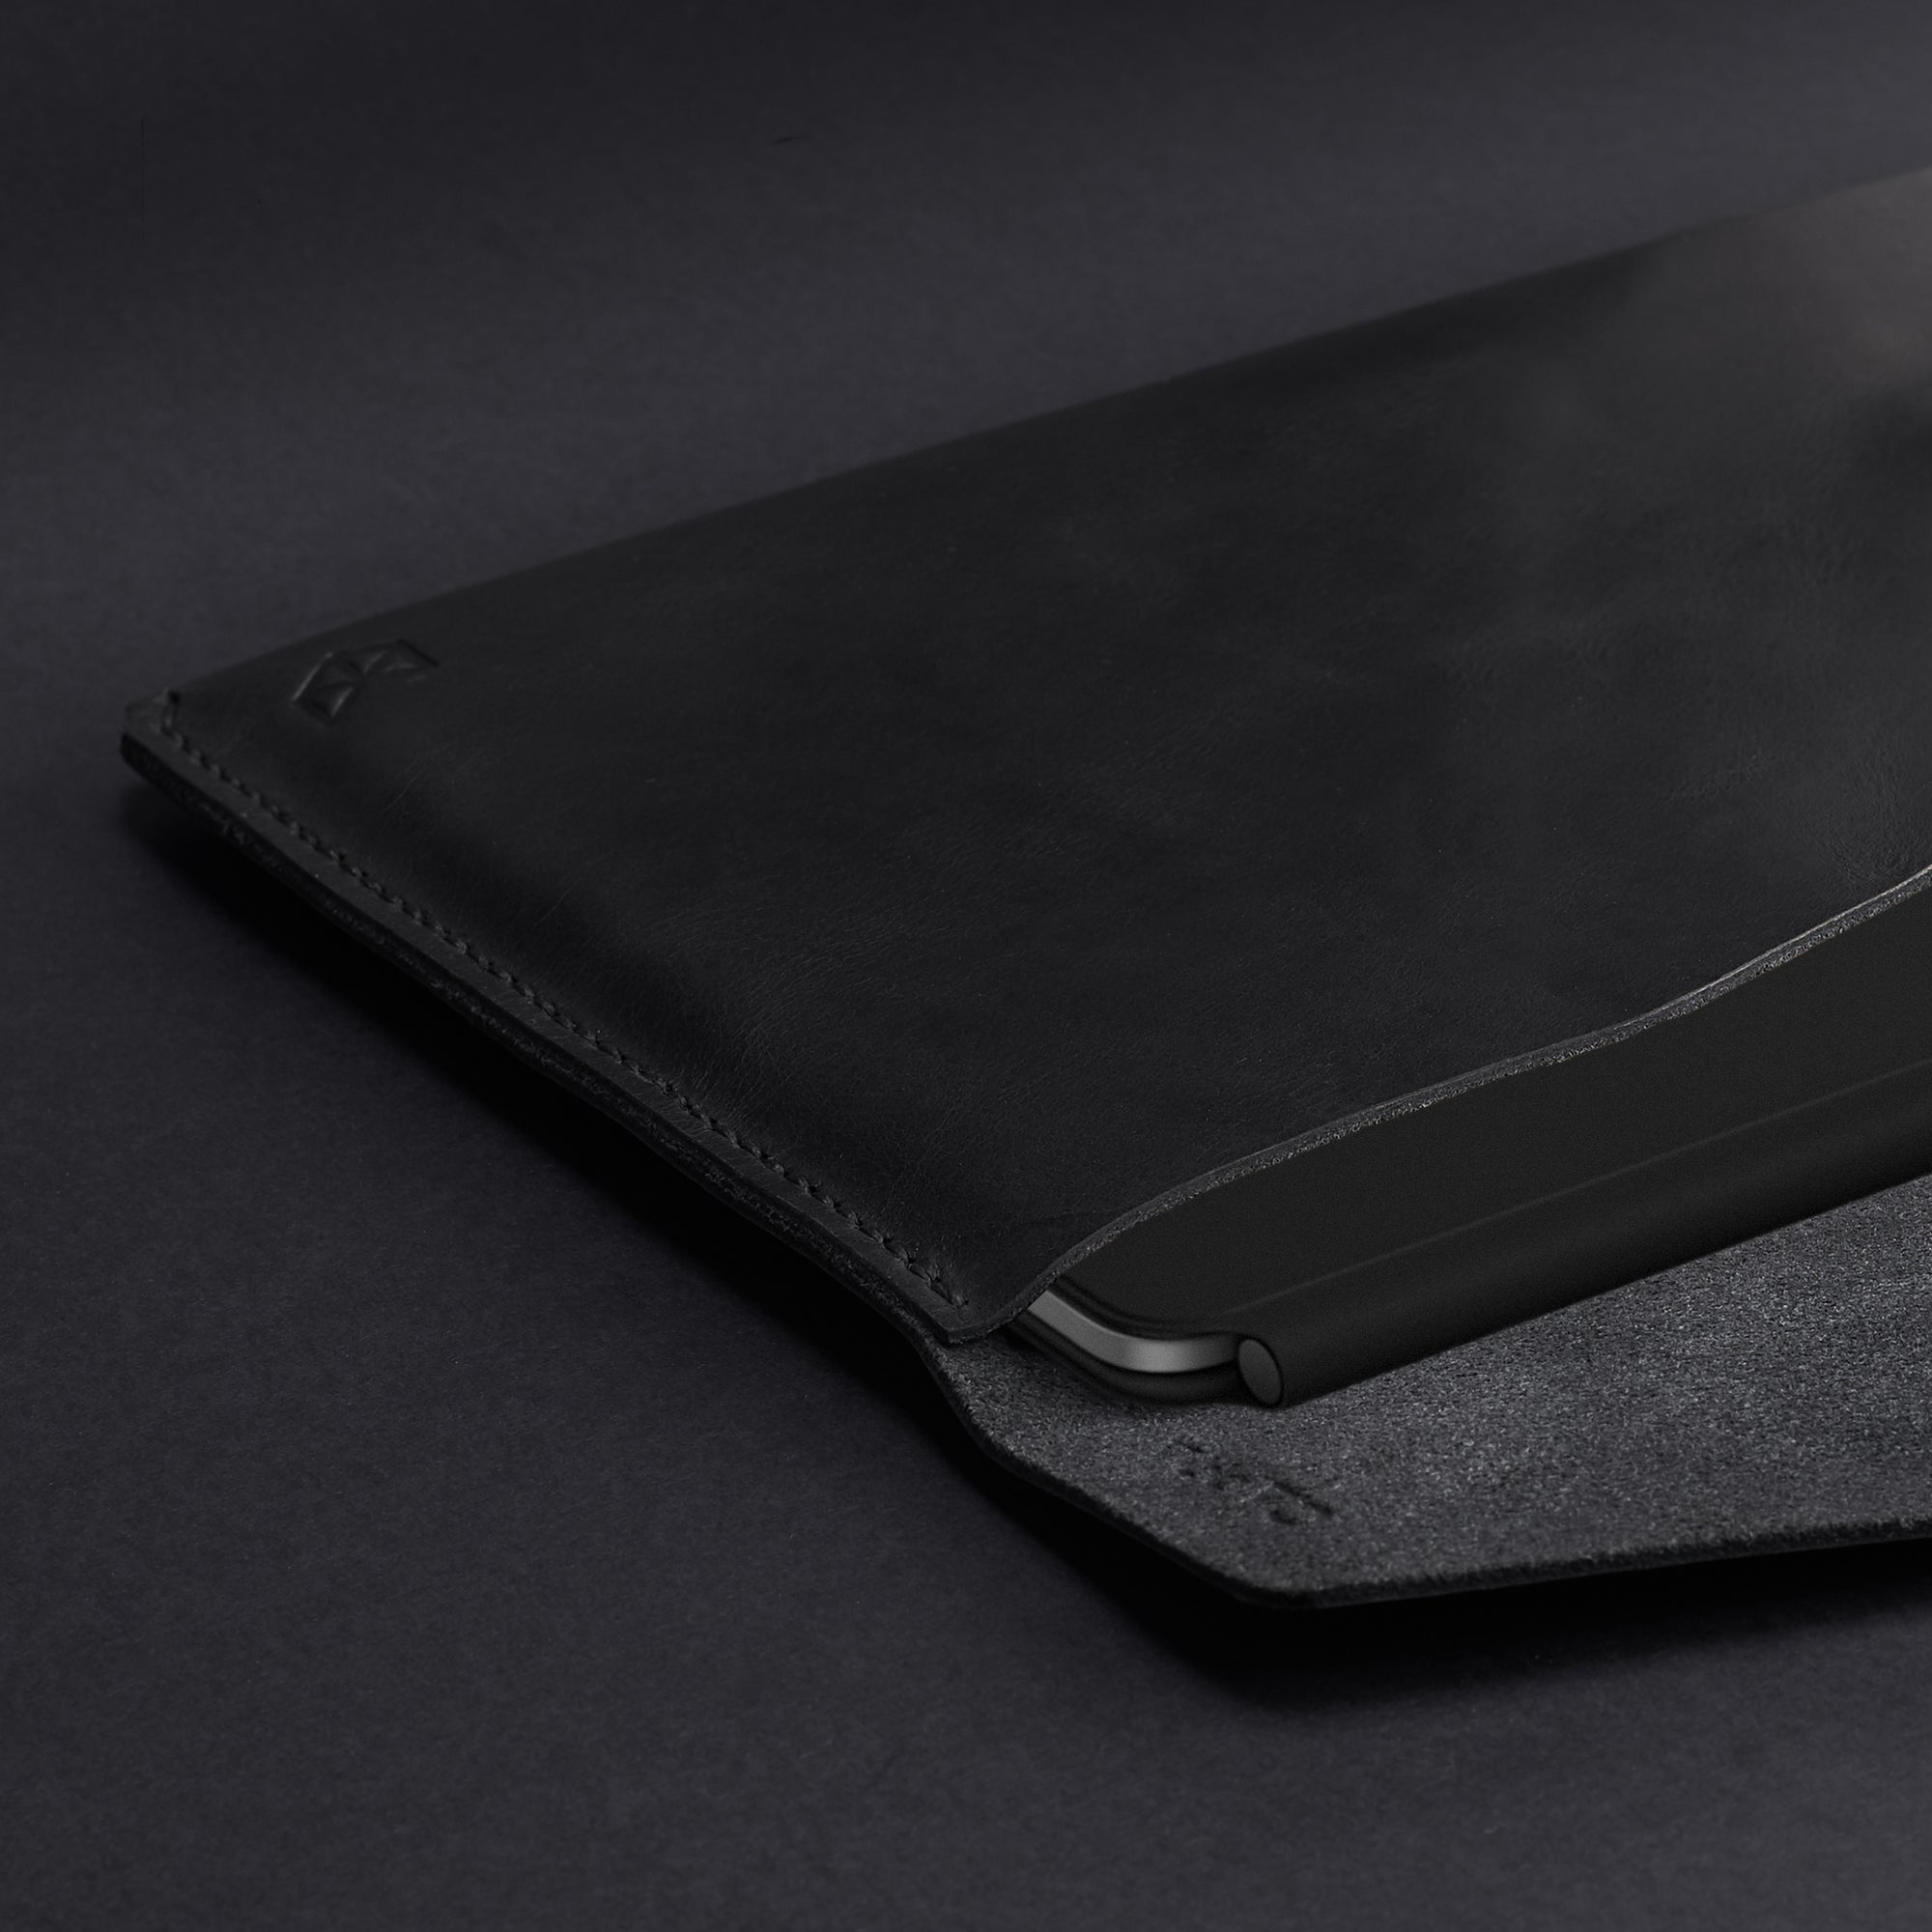 Hand stitching. iPad Sleeve. iPad Leather Case Black With Apple Pencil Holder by Capra Leather